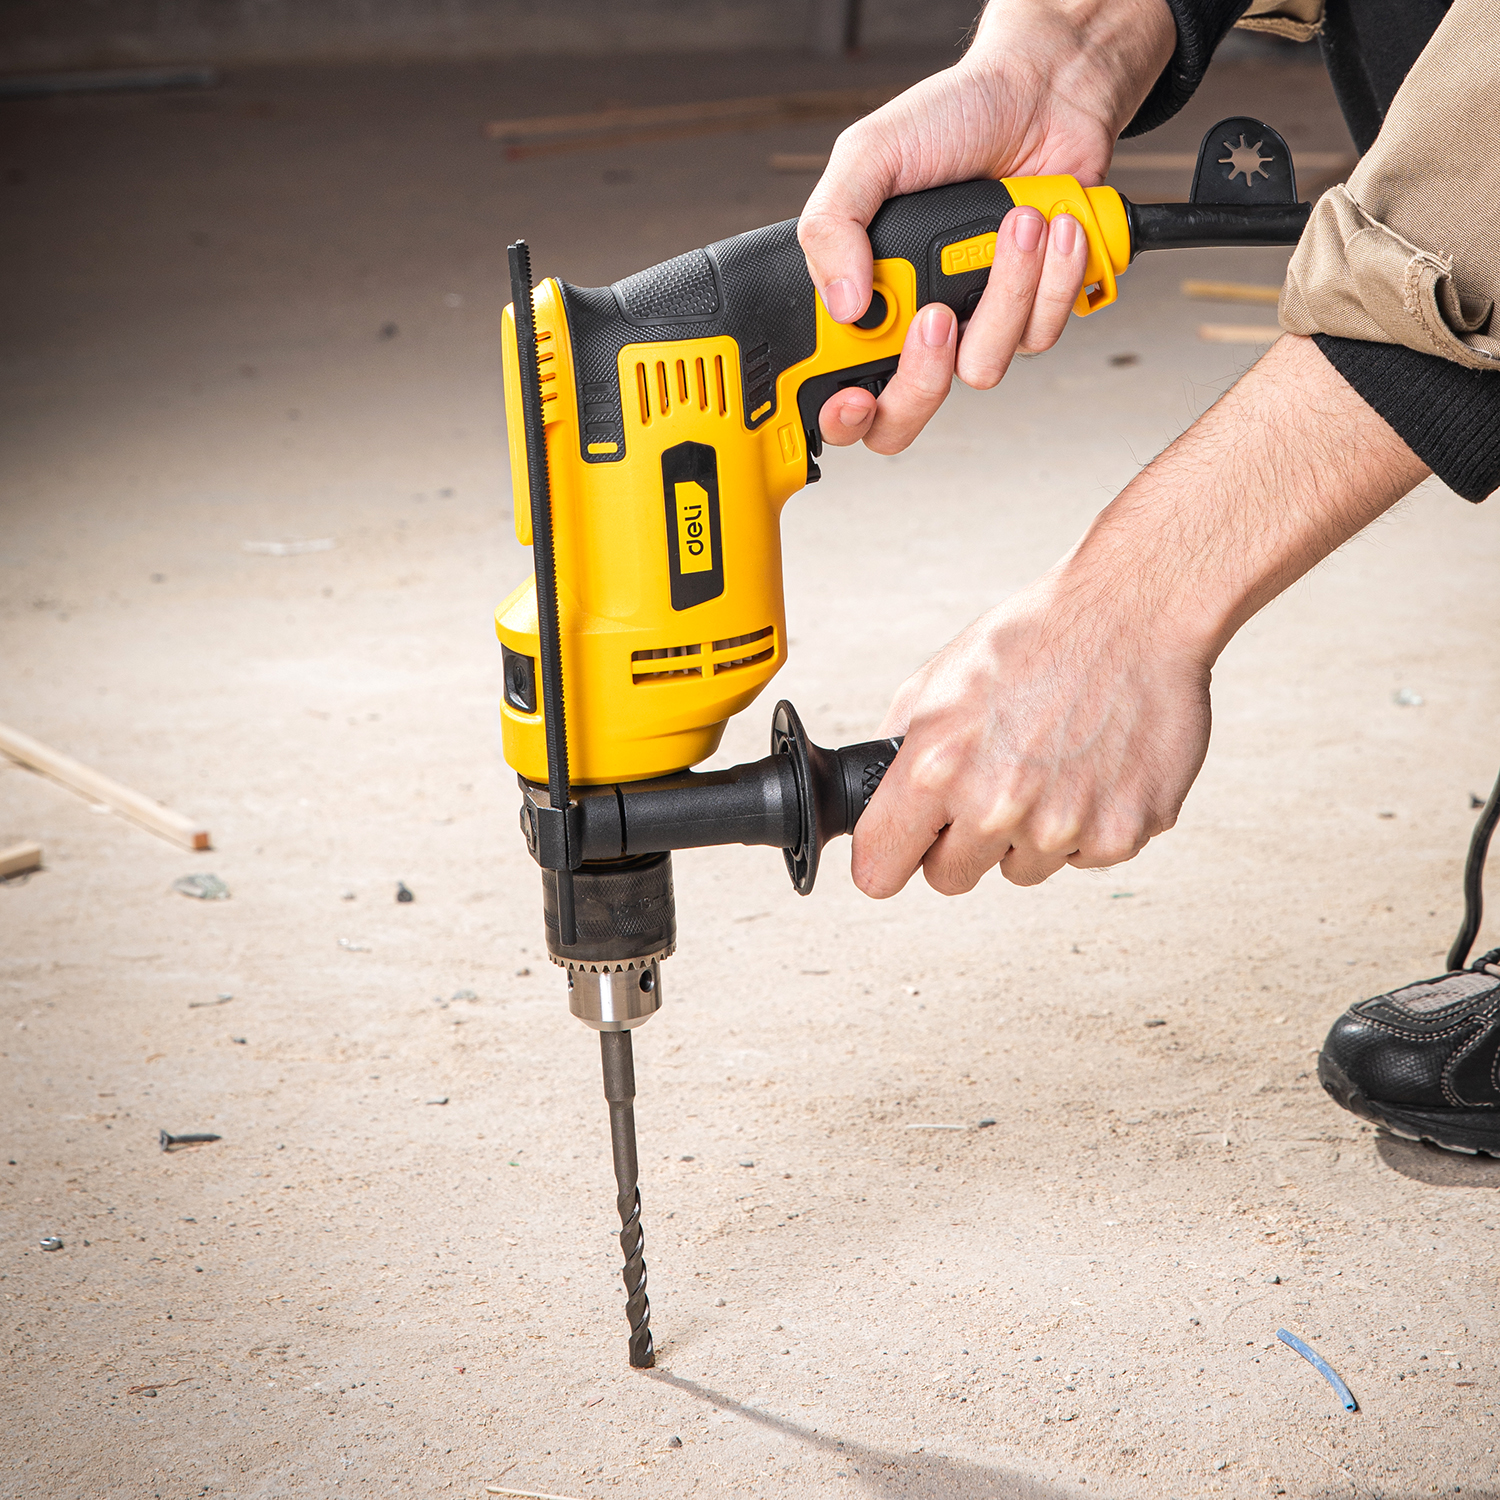 Portable Corded electric drill for tires